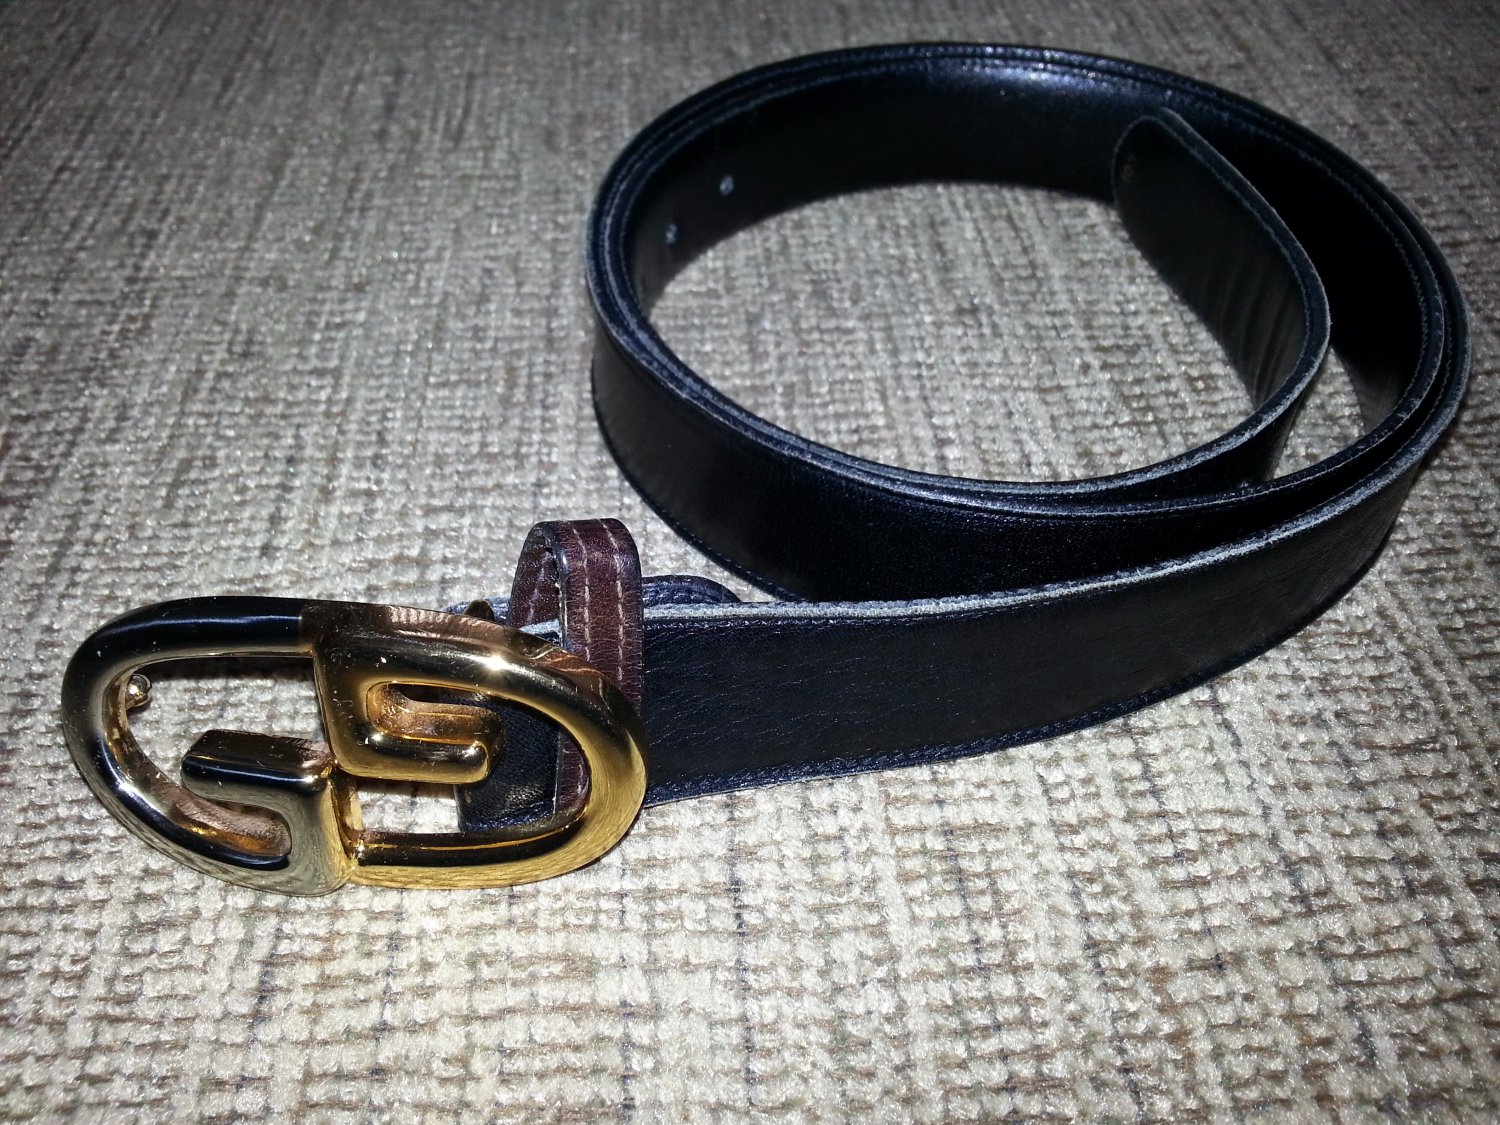 Gucci Men&#39;s Brown Leather Belt with Two-Tone GG Buckle - SIZE L/XL - VINTAGE - AUTHENTIC!